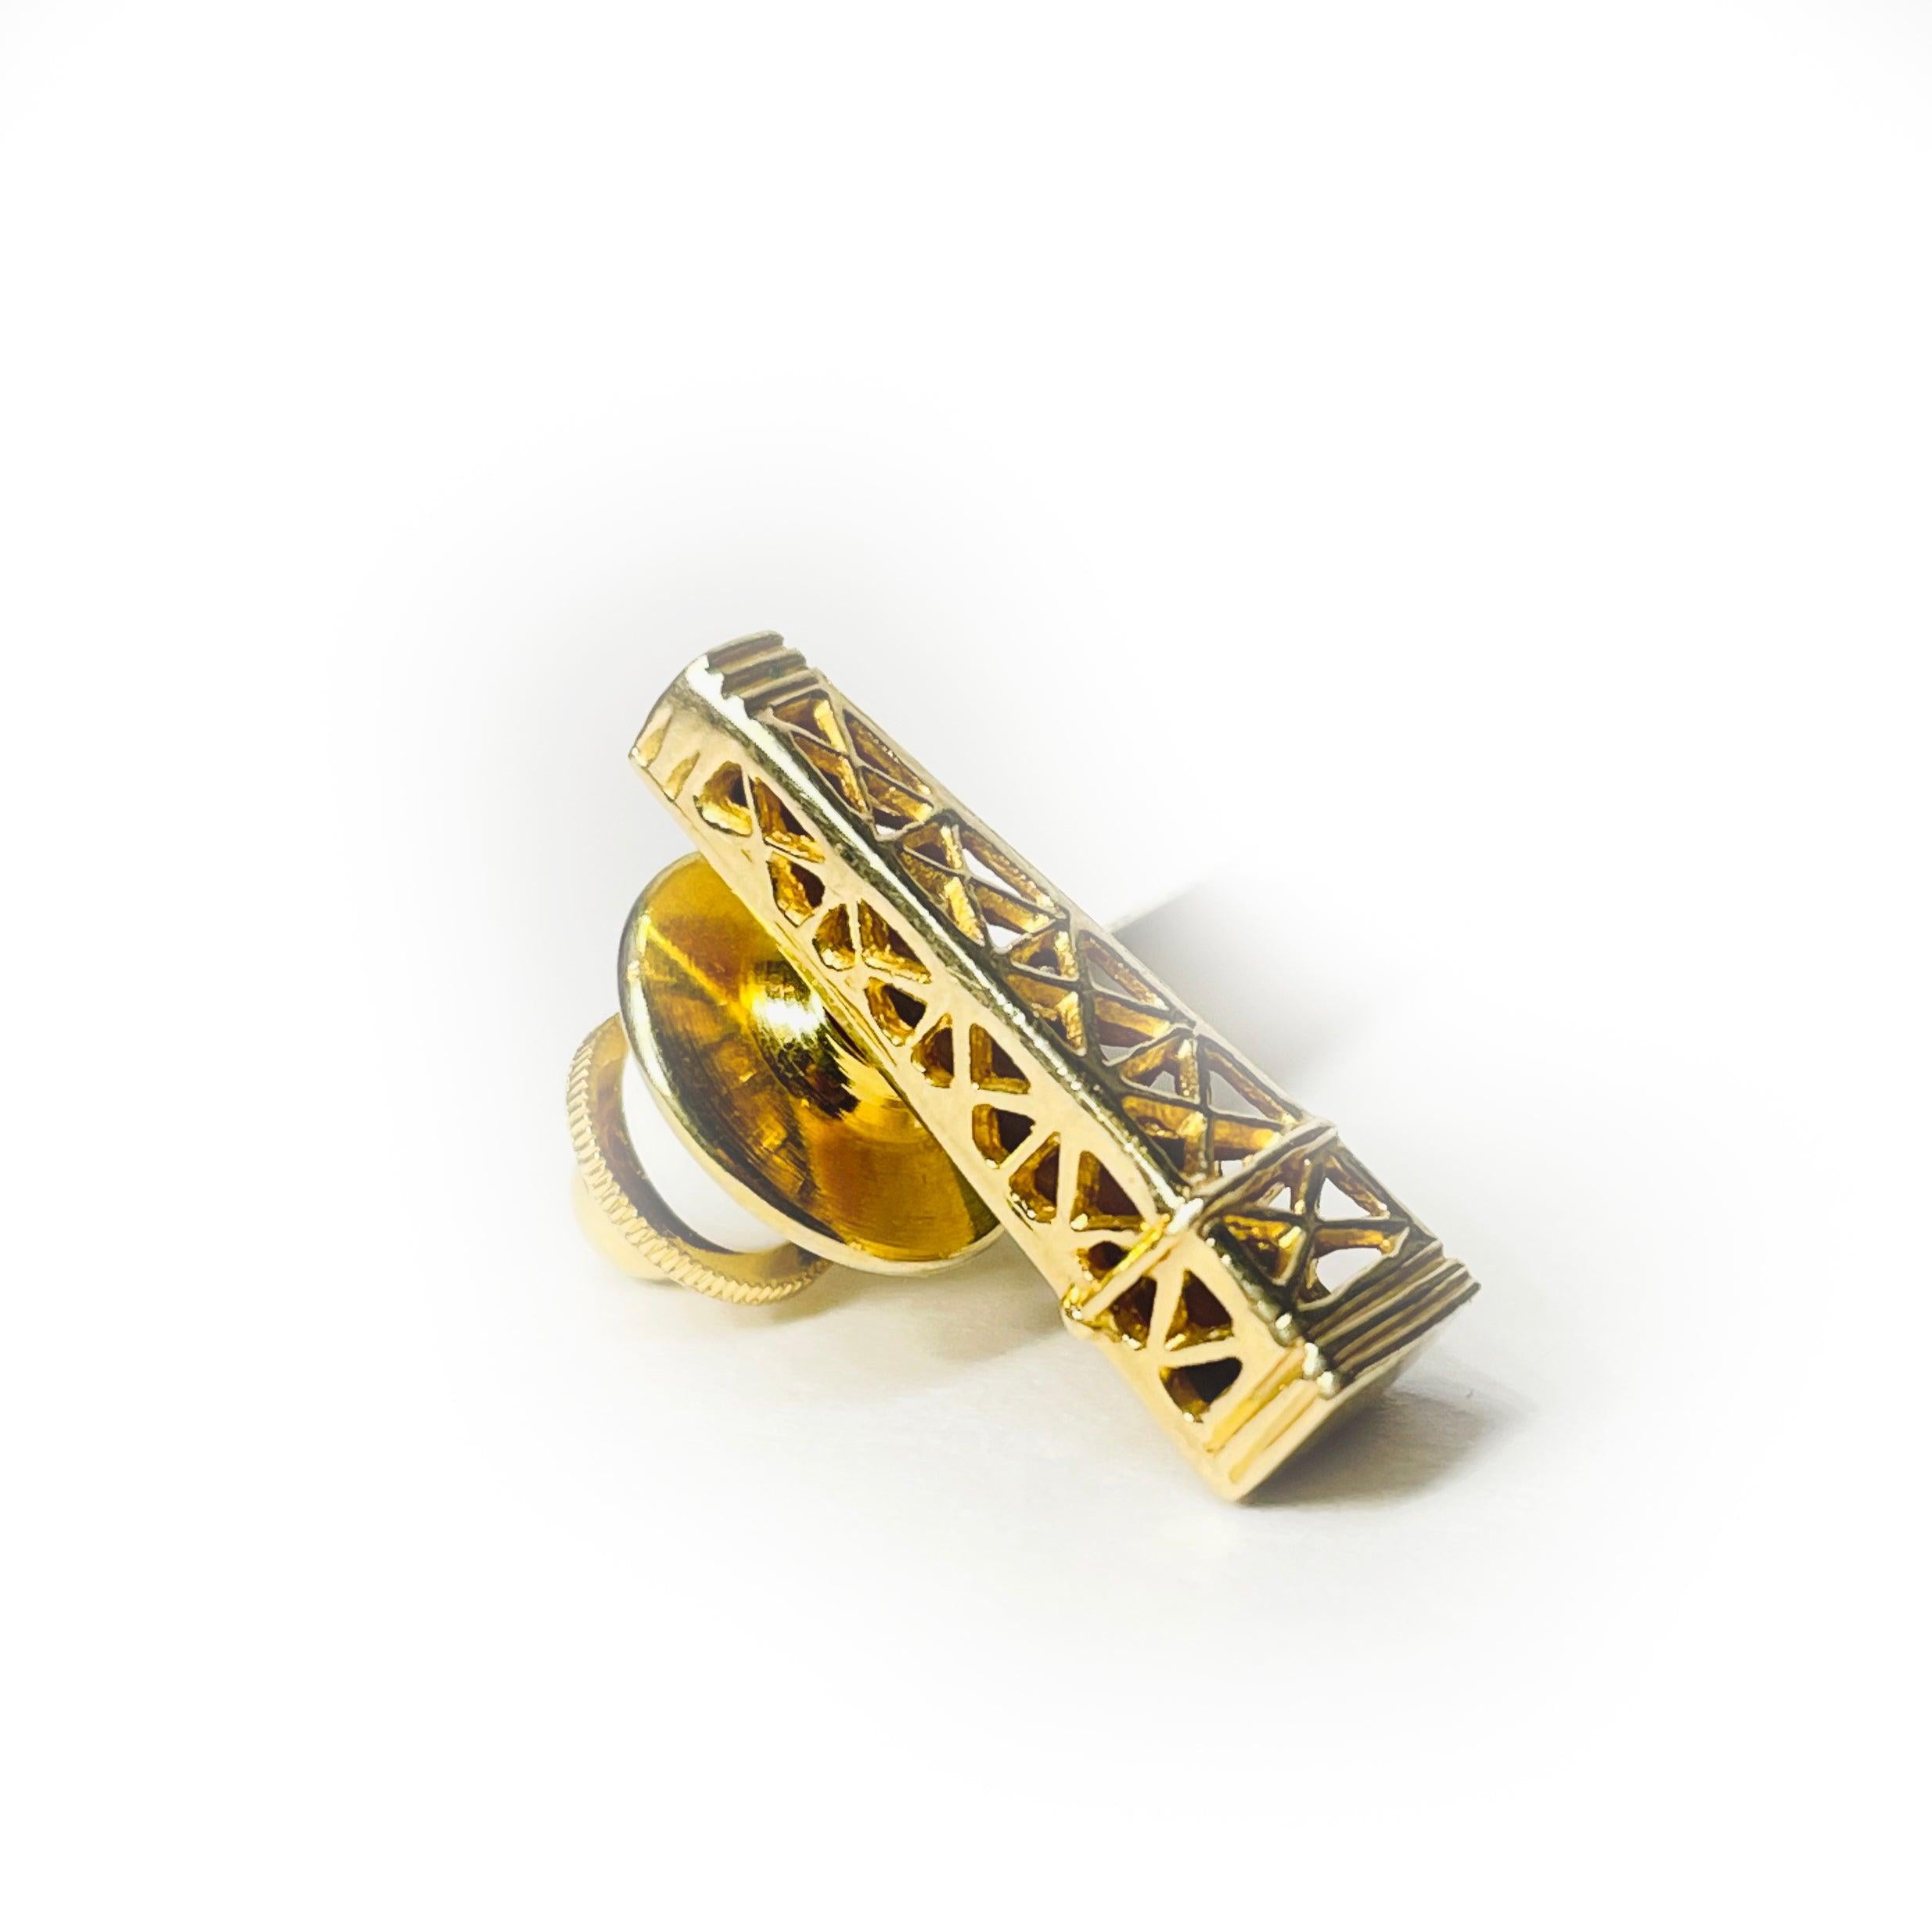 Make a bold statement with this exquisite 14k yellow gold tower pin, Weighing 3.9 grams expertly crafted to capture the timeless allure of the Art Deco era.  

Well Made & Design

